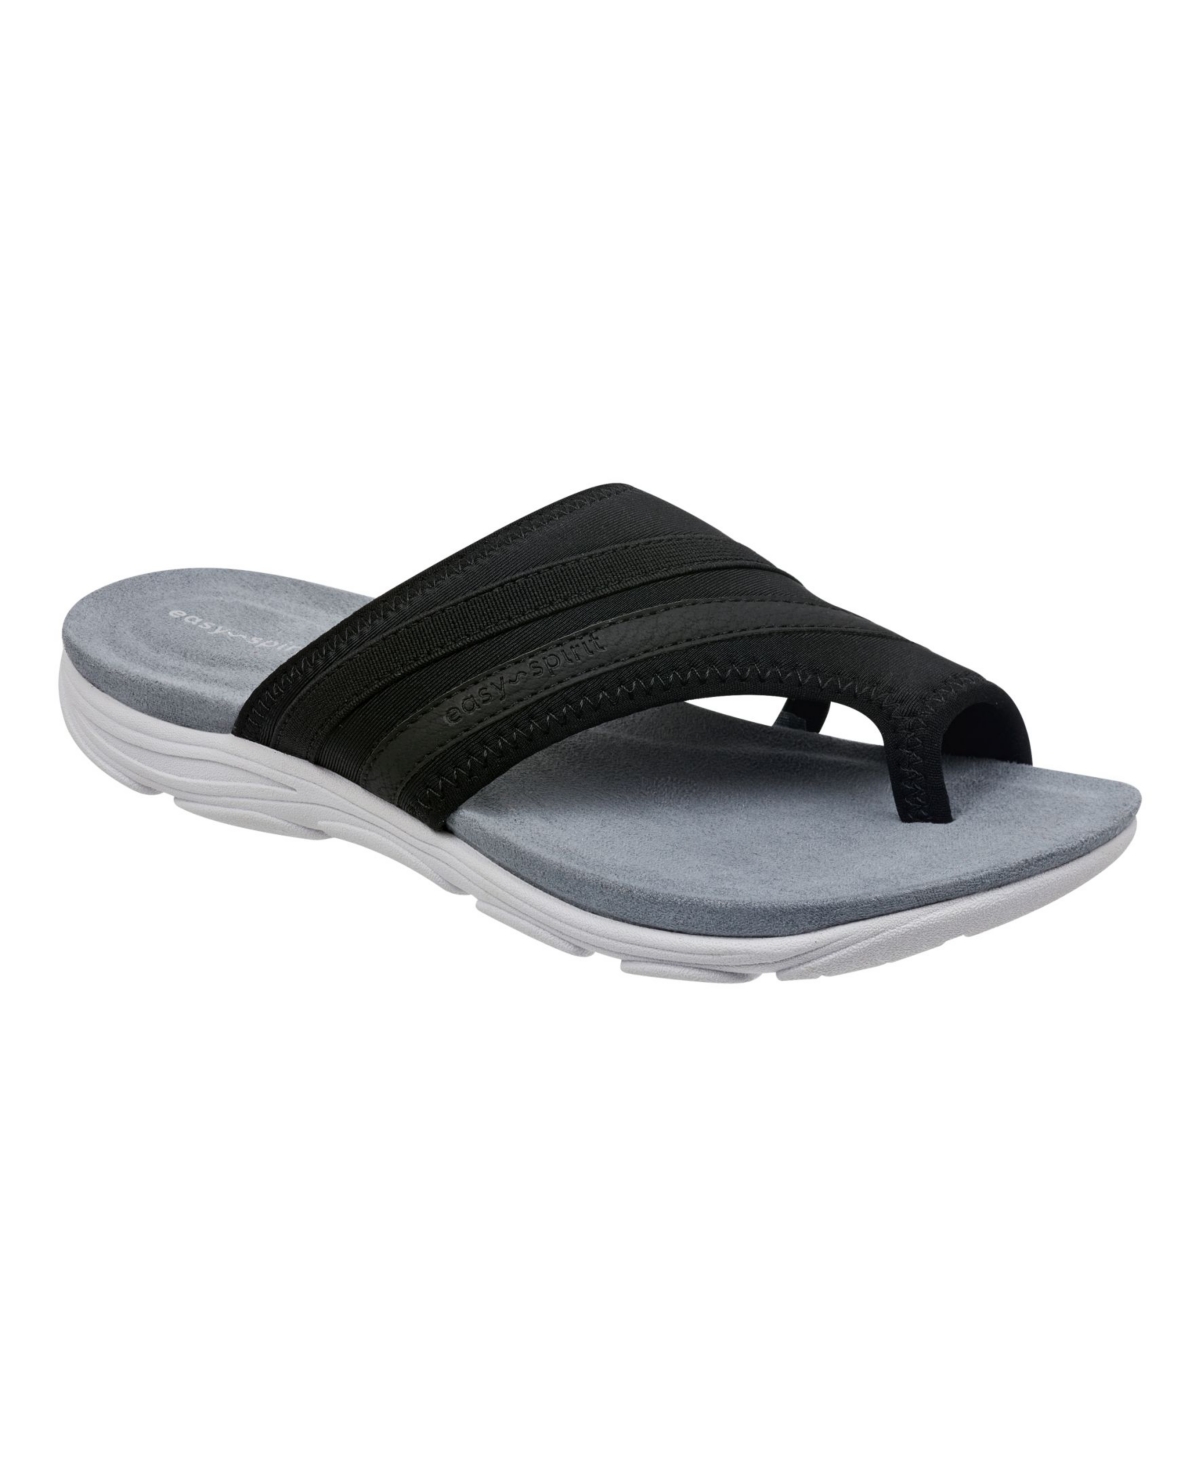 UPC 192733437045 product image for Easy Spirit Women's Lola Square Toe Casual Toe Ring Flat Sandals Women's Shoes | upcitemdb.com